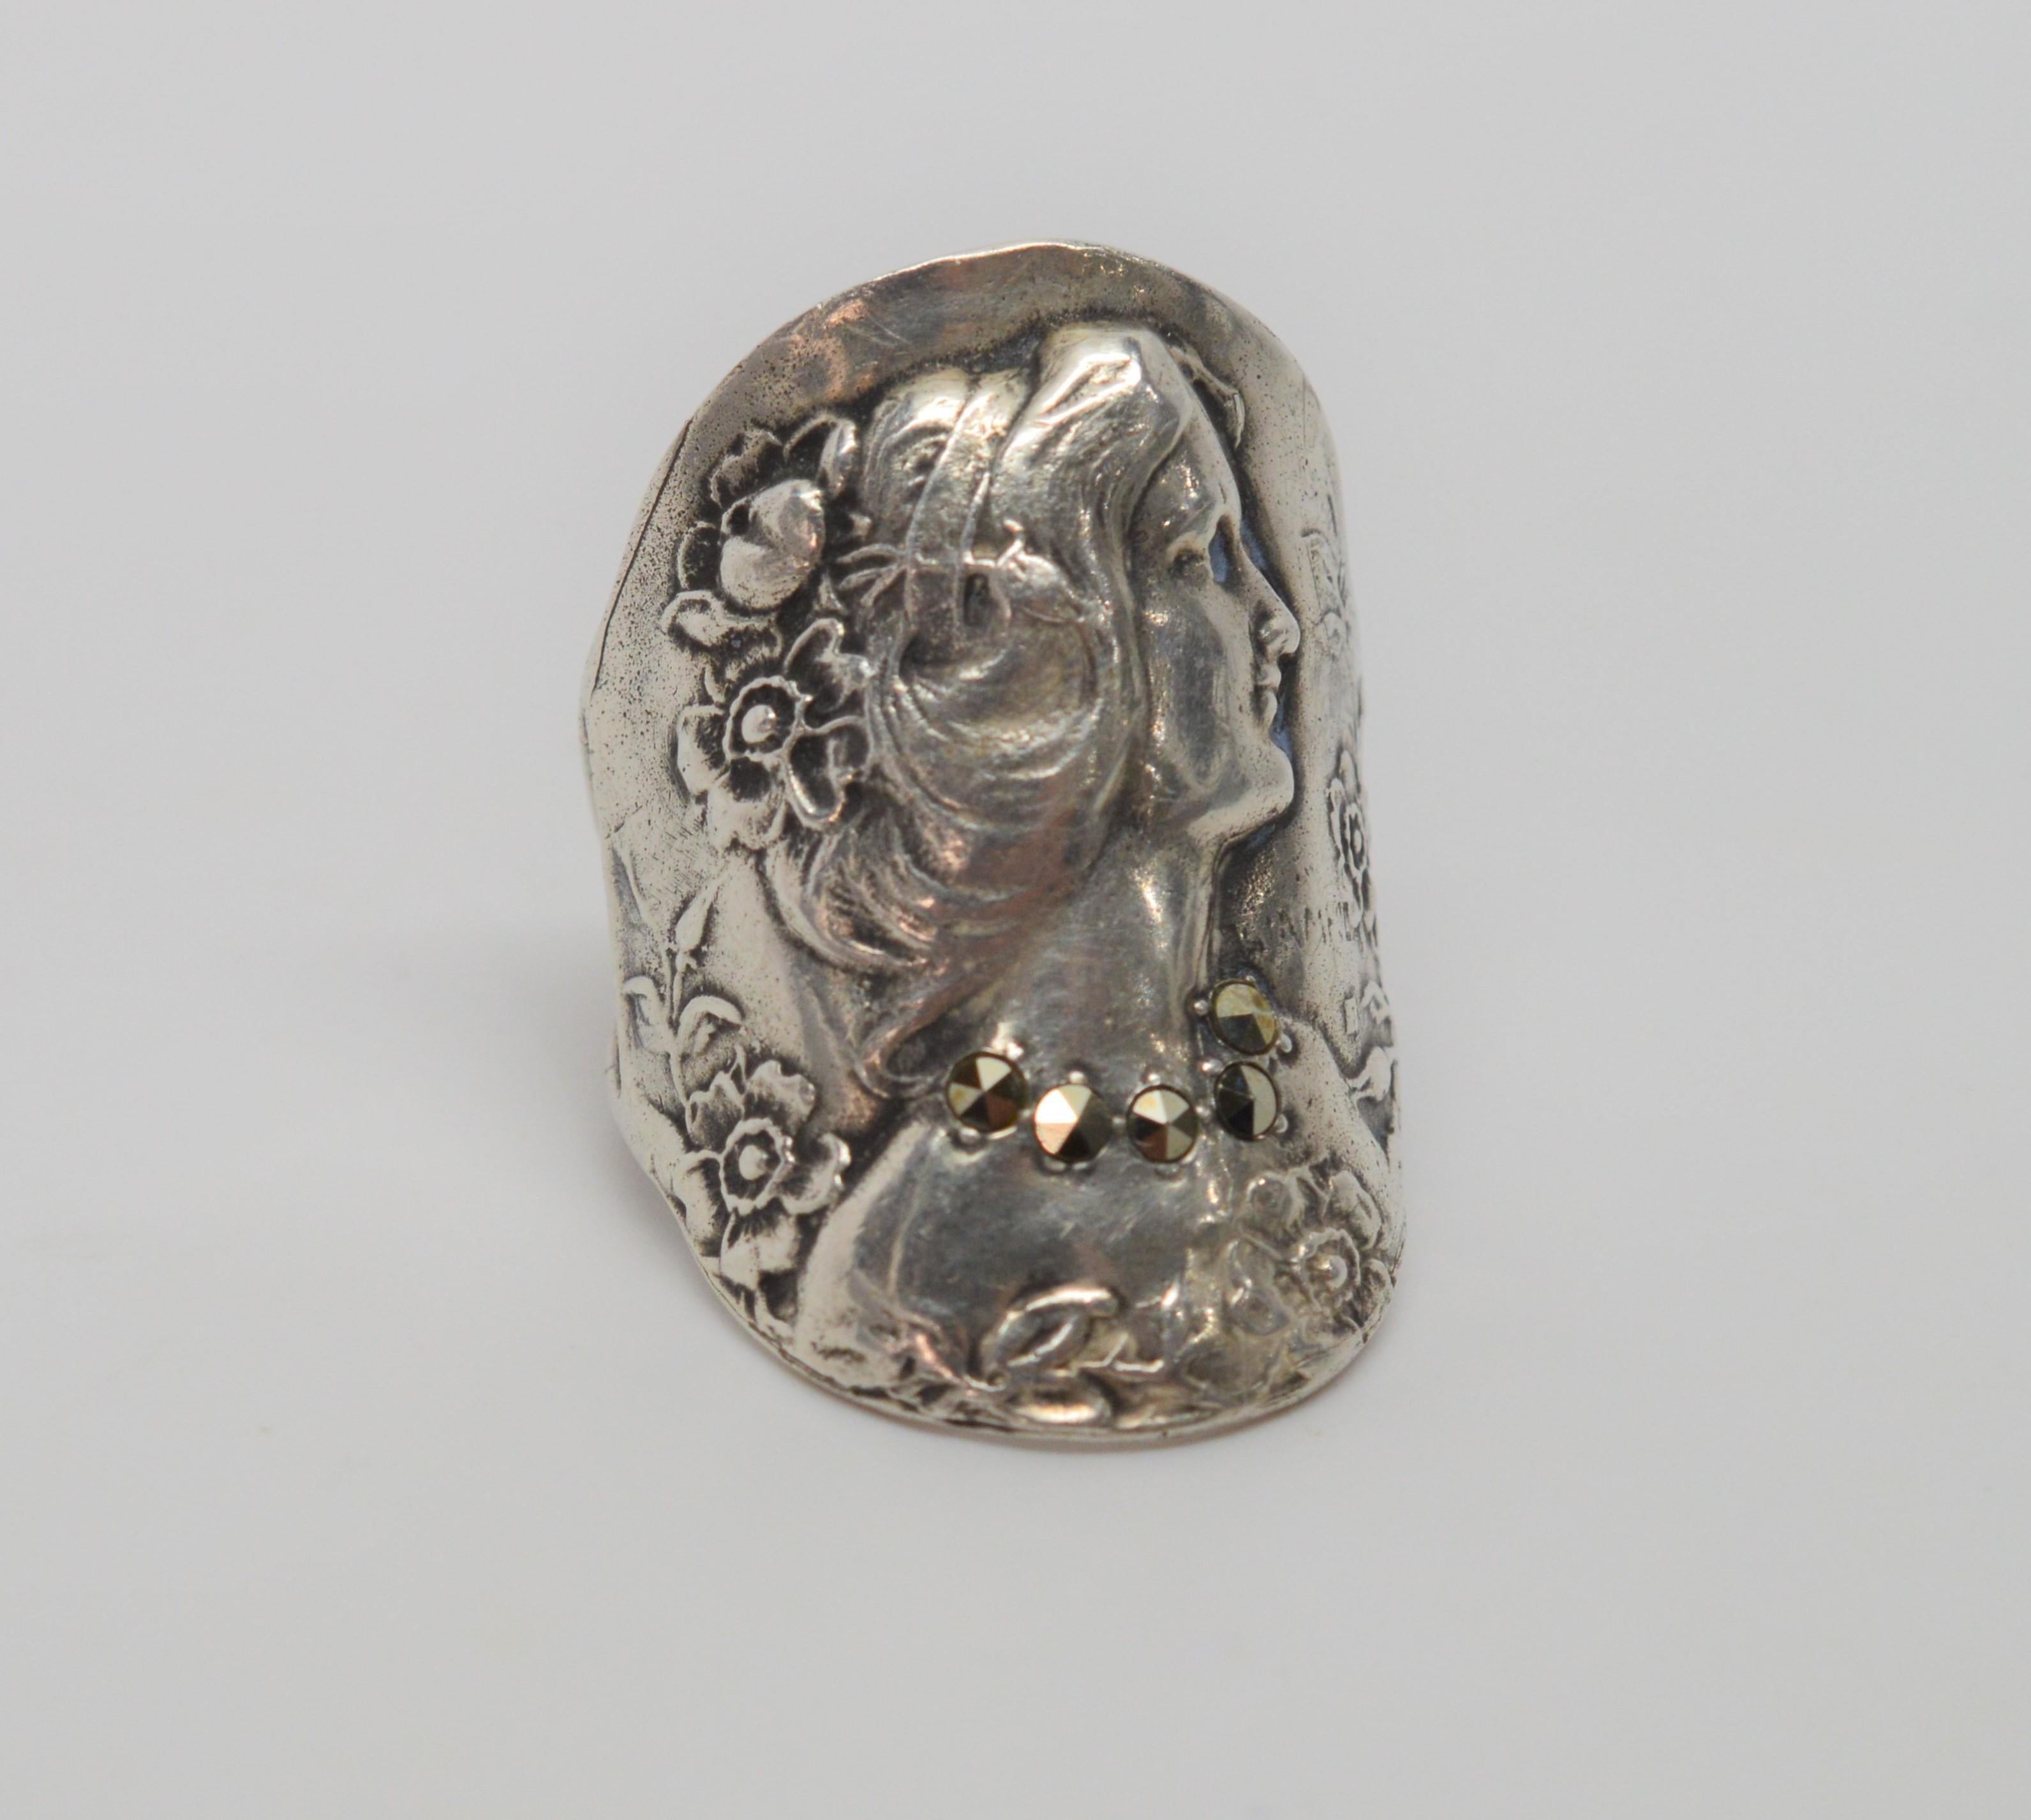 Unusual, this original Art Deco Ring is a beautiful image of an elegant lady with sweeping hair, a jeweled marcasite necklace and floral enhancements. An often copied design, this original with faint maker's mark is made in Sterling Silver in size